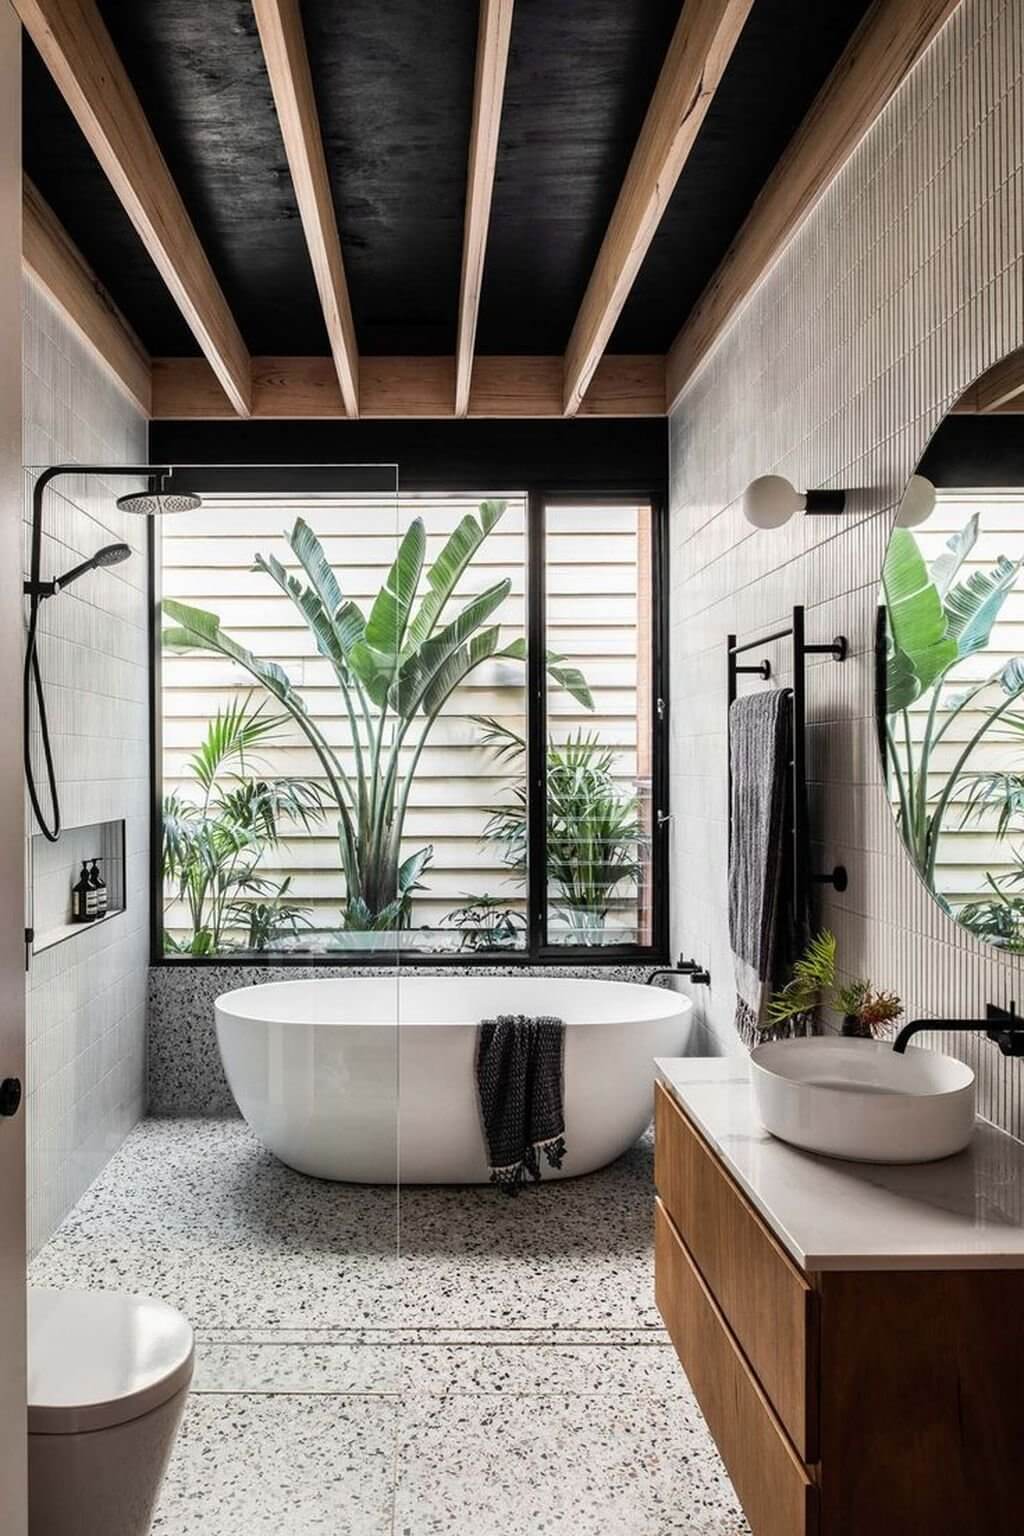 The wood and white decor is also invited in your bathroom (1)